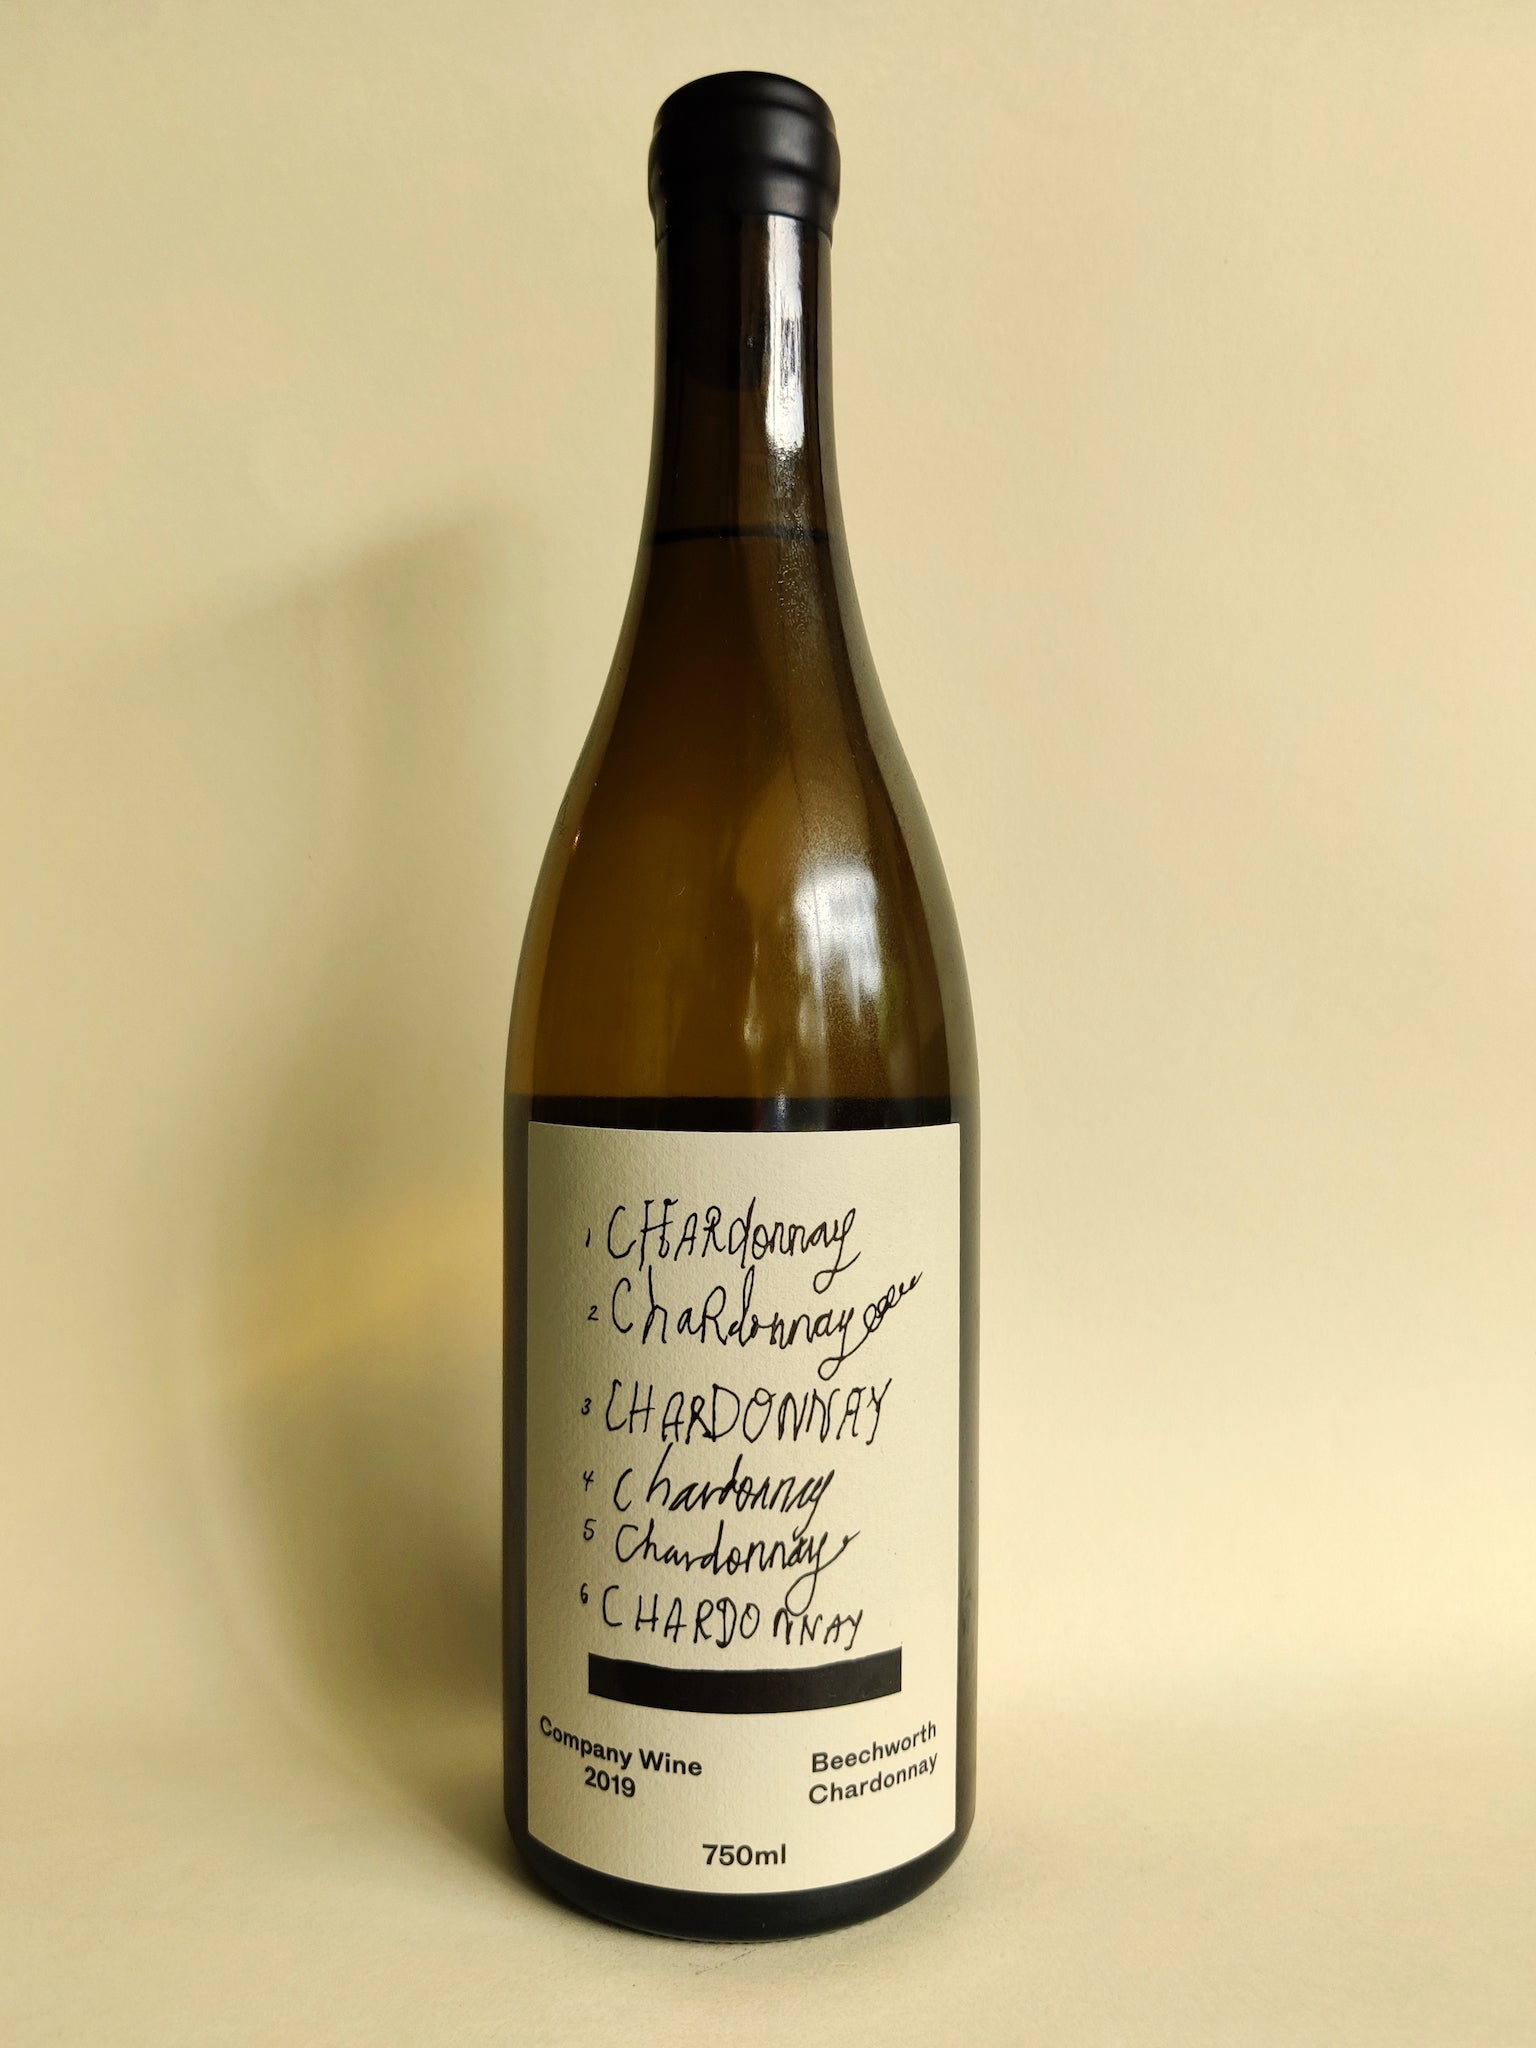 A bottle of Company Wine Chardonnay from Beechworth, Victoria.